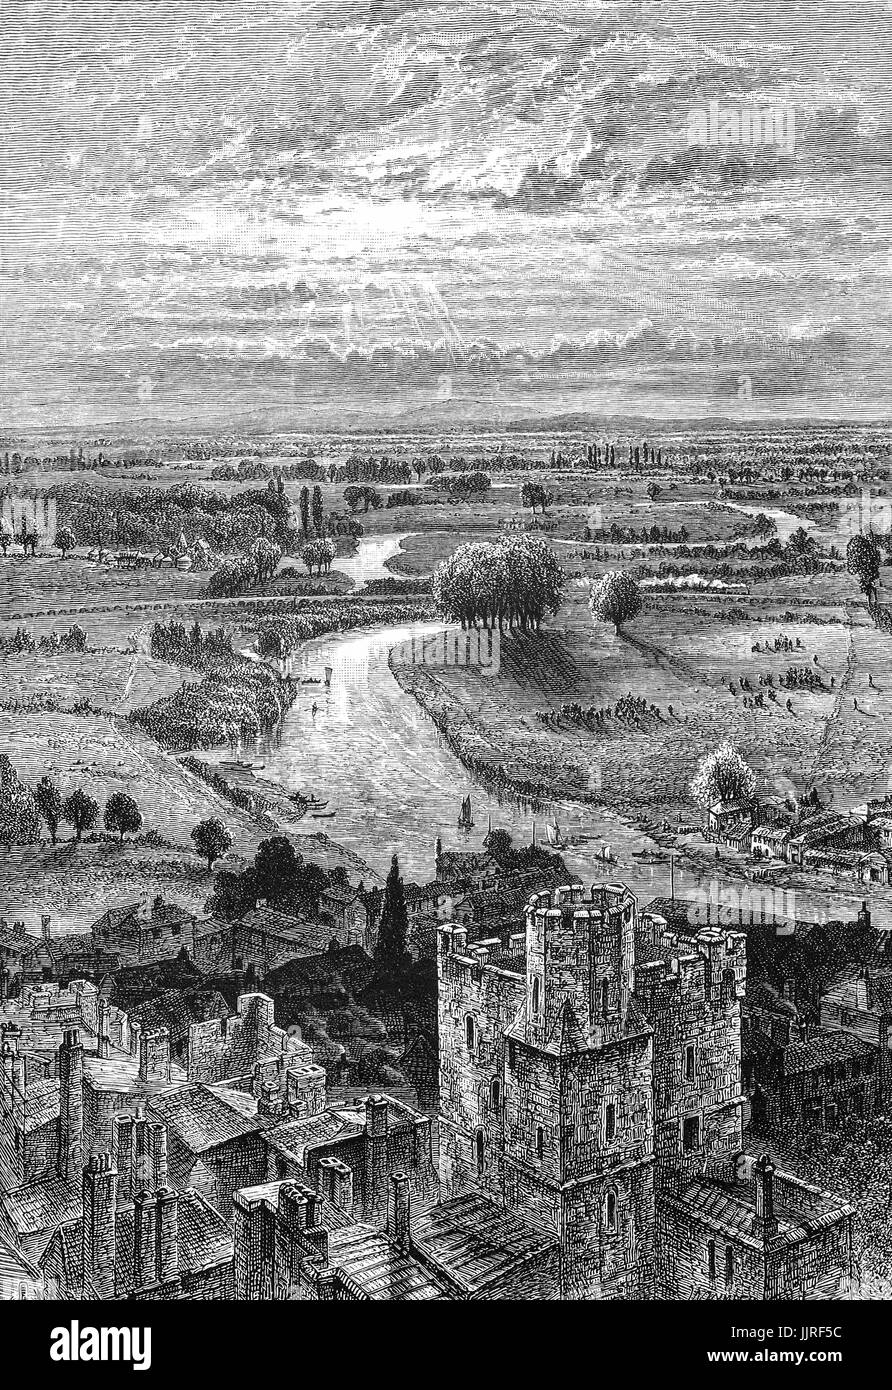 1870: An aerial view of the River Thames from the Round Tower, Windsor Castle, Berhshire, England Stock Photo